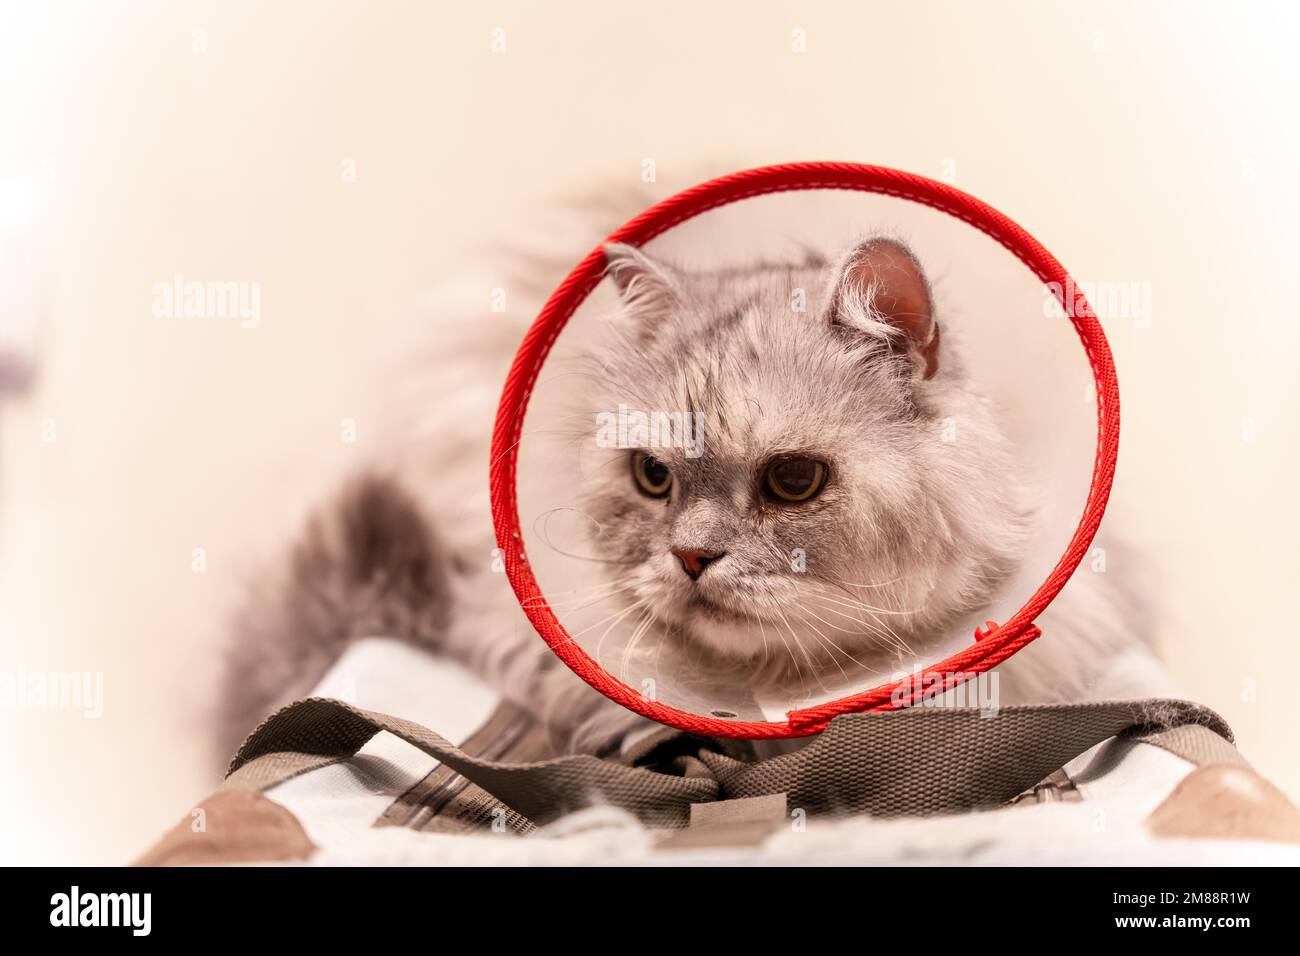 Veterinary clinic, a Siberian cat with a protector so that it does not bite or scratch Stock Photo